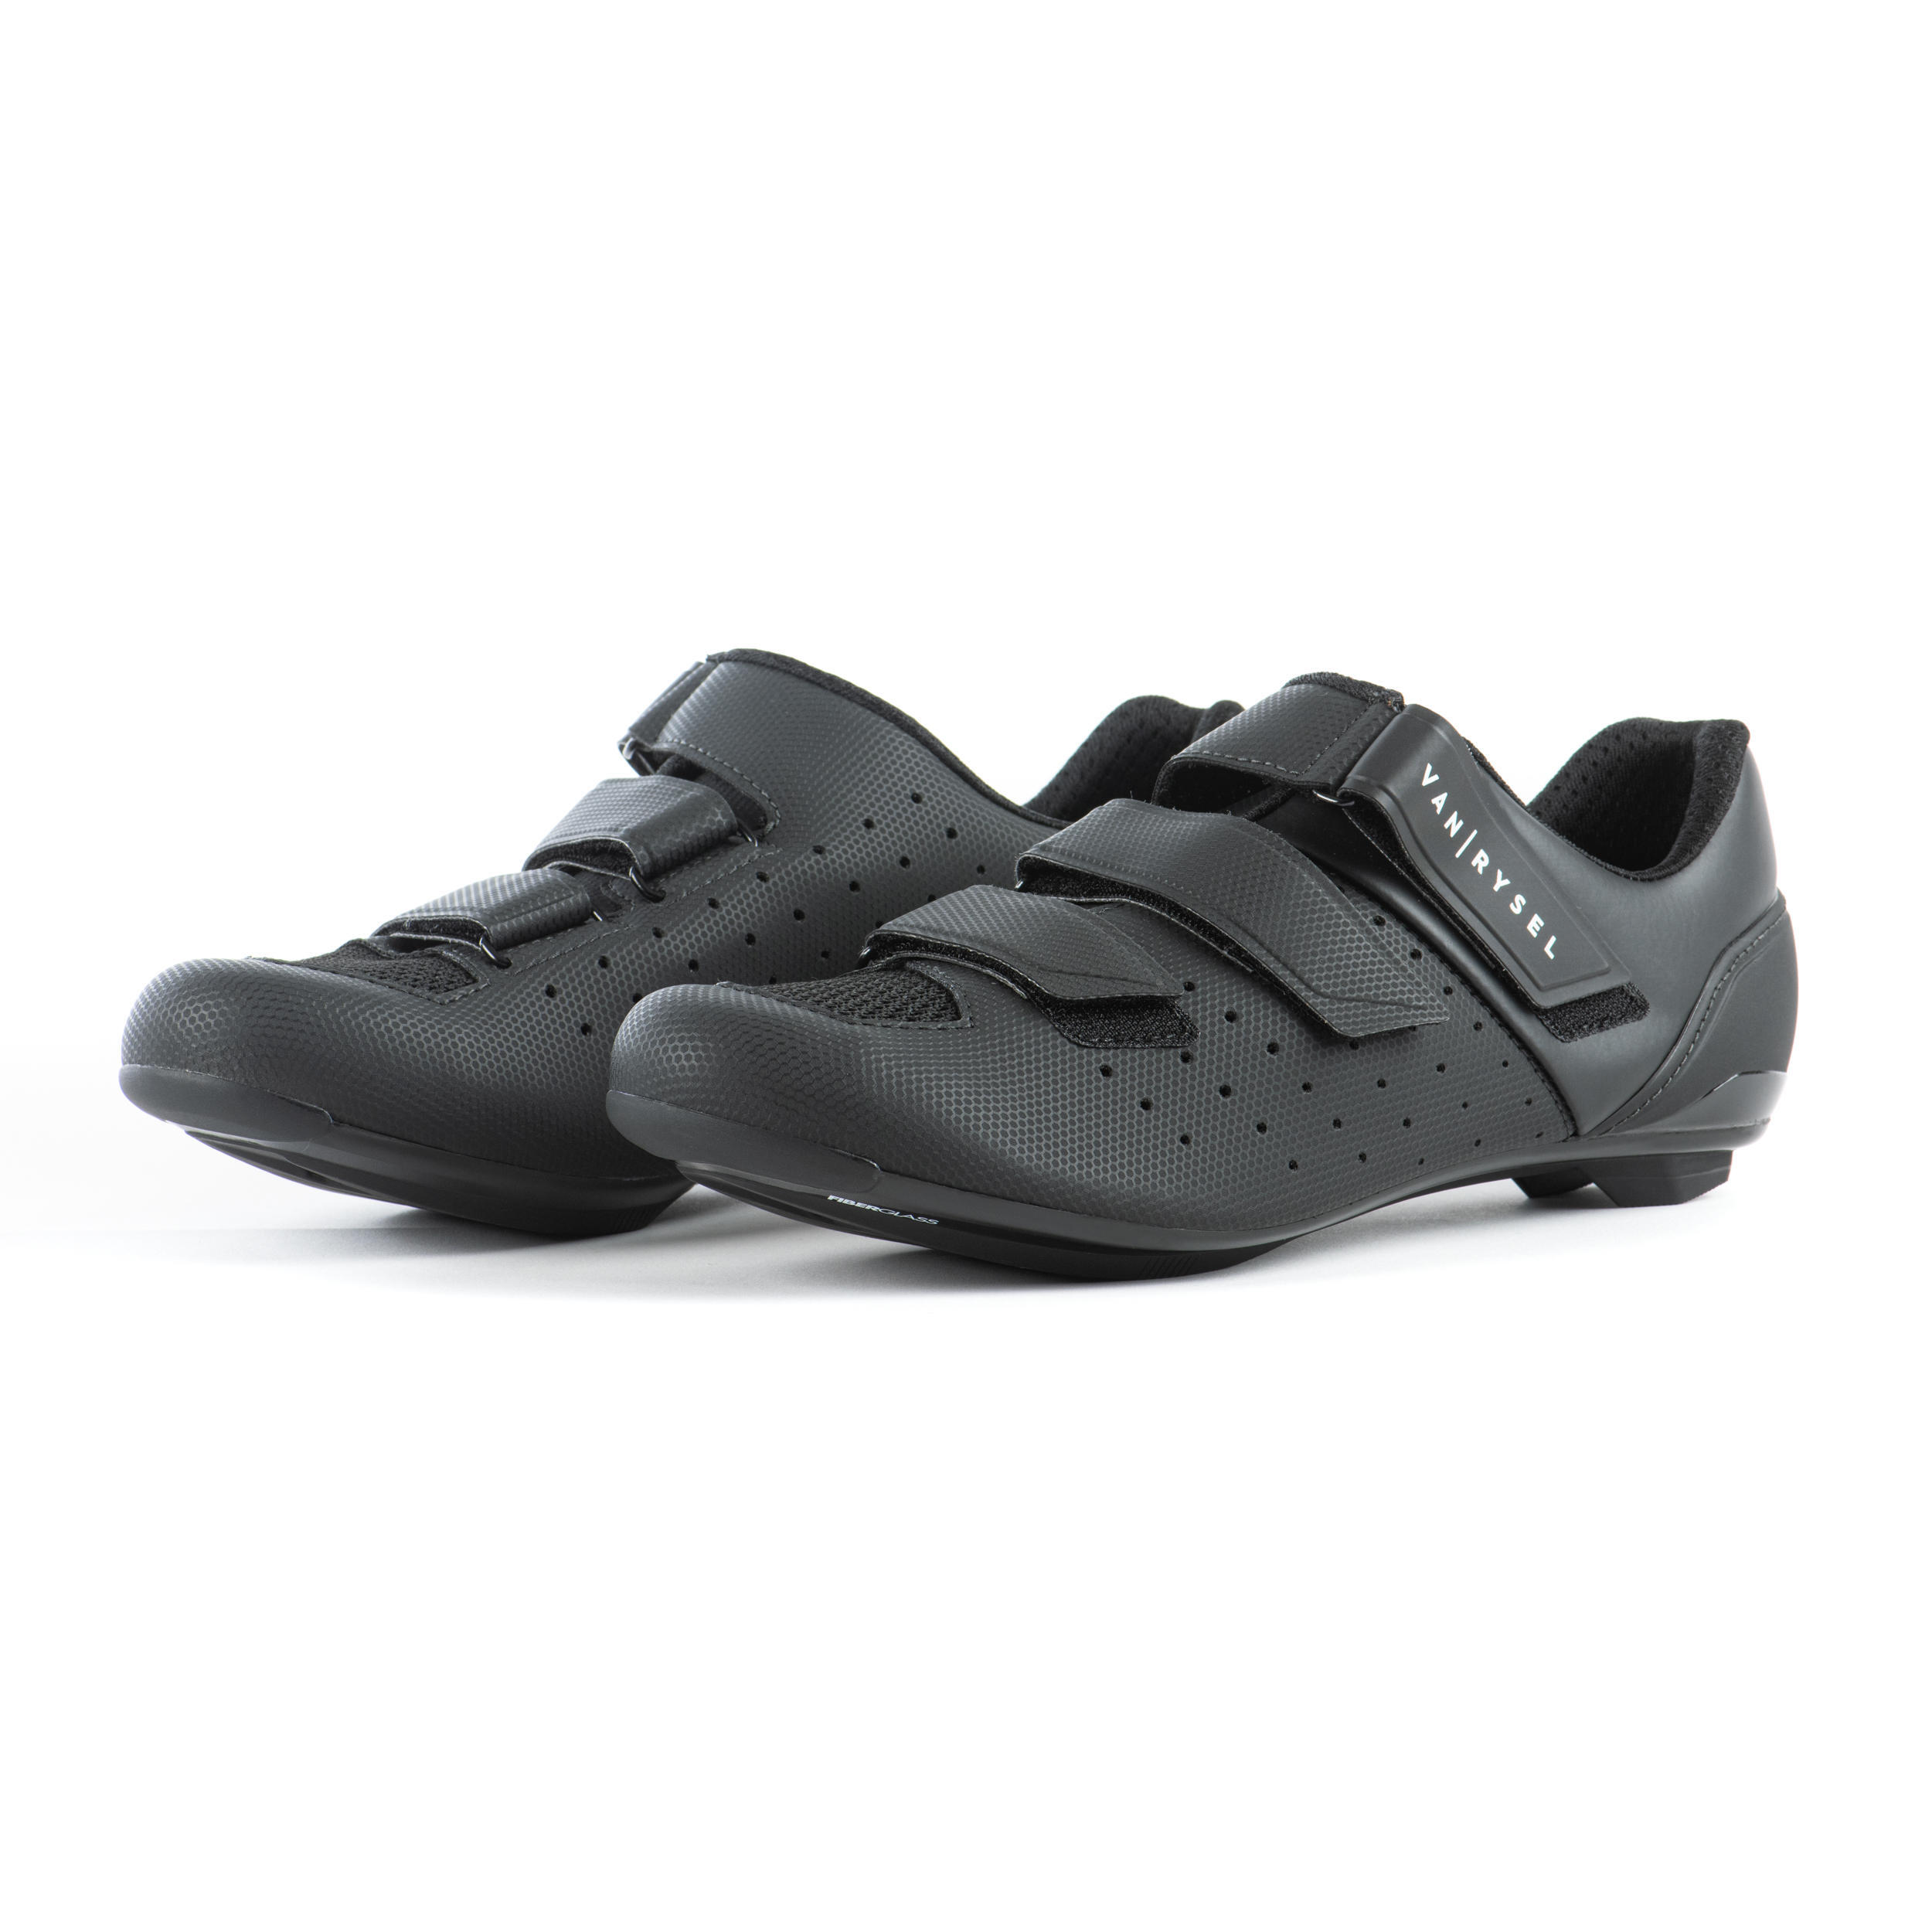 Sportive Road Cycling Shoes 500 - Black 1/4